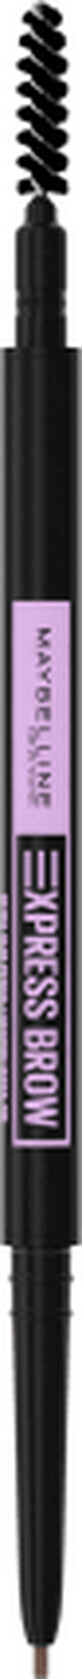 Maybelline New York Express Brow Crayon &#224; sourcils ultra mince 4.5 Ash Brown, 1 pc